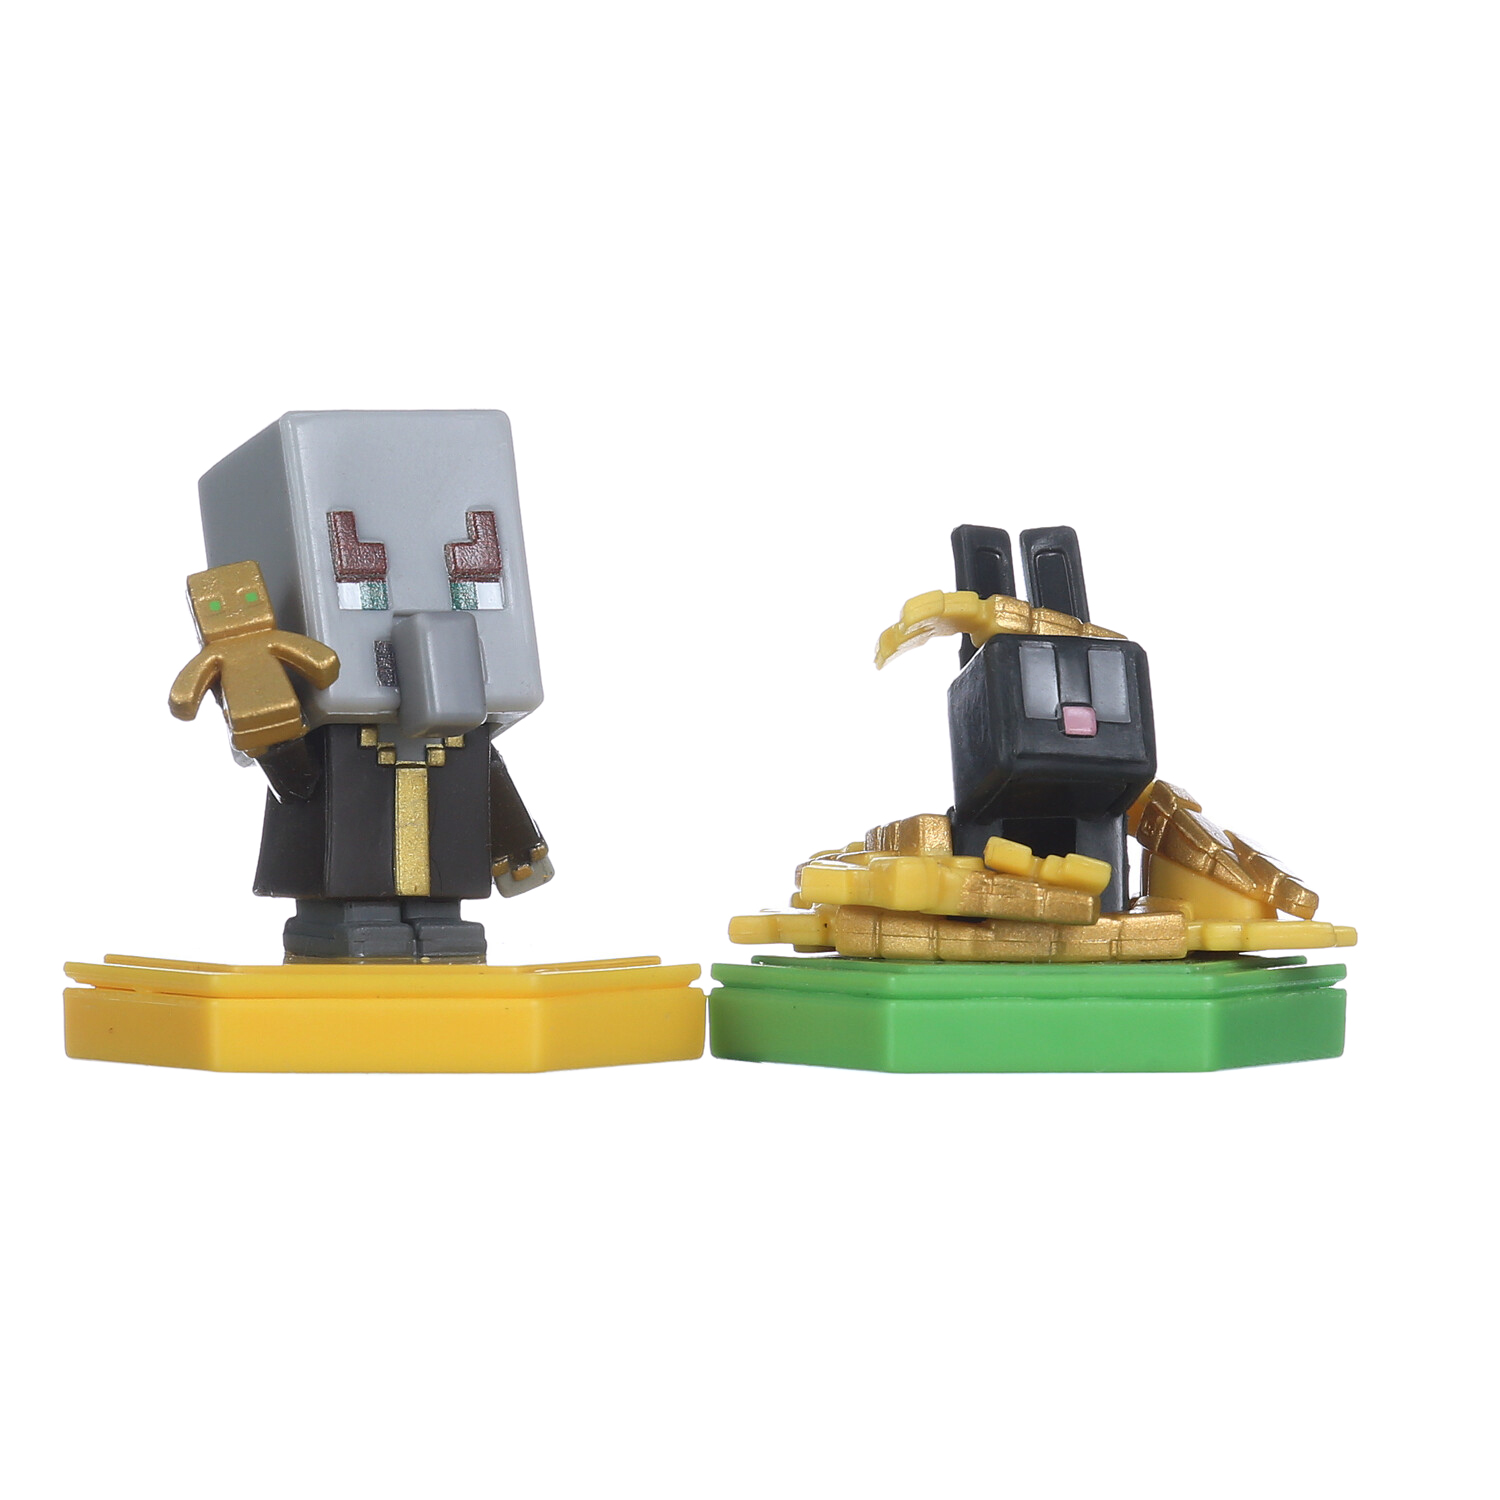 Minecraft Earth Boost Minis Action Figurine Figures E Augmented Reality Game